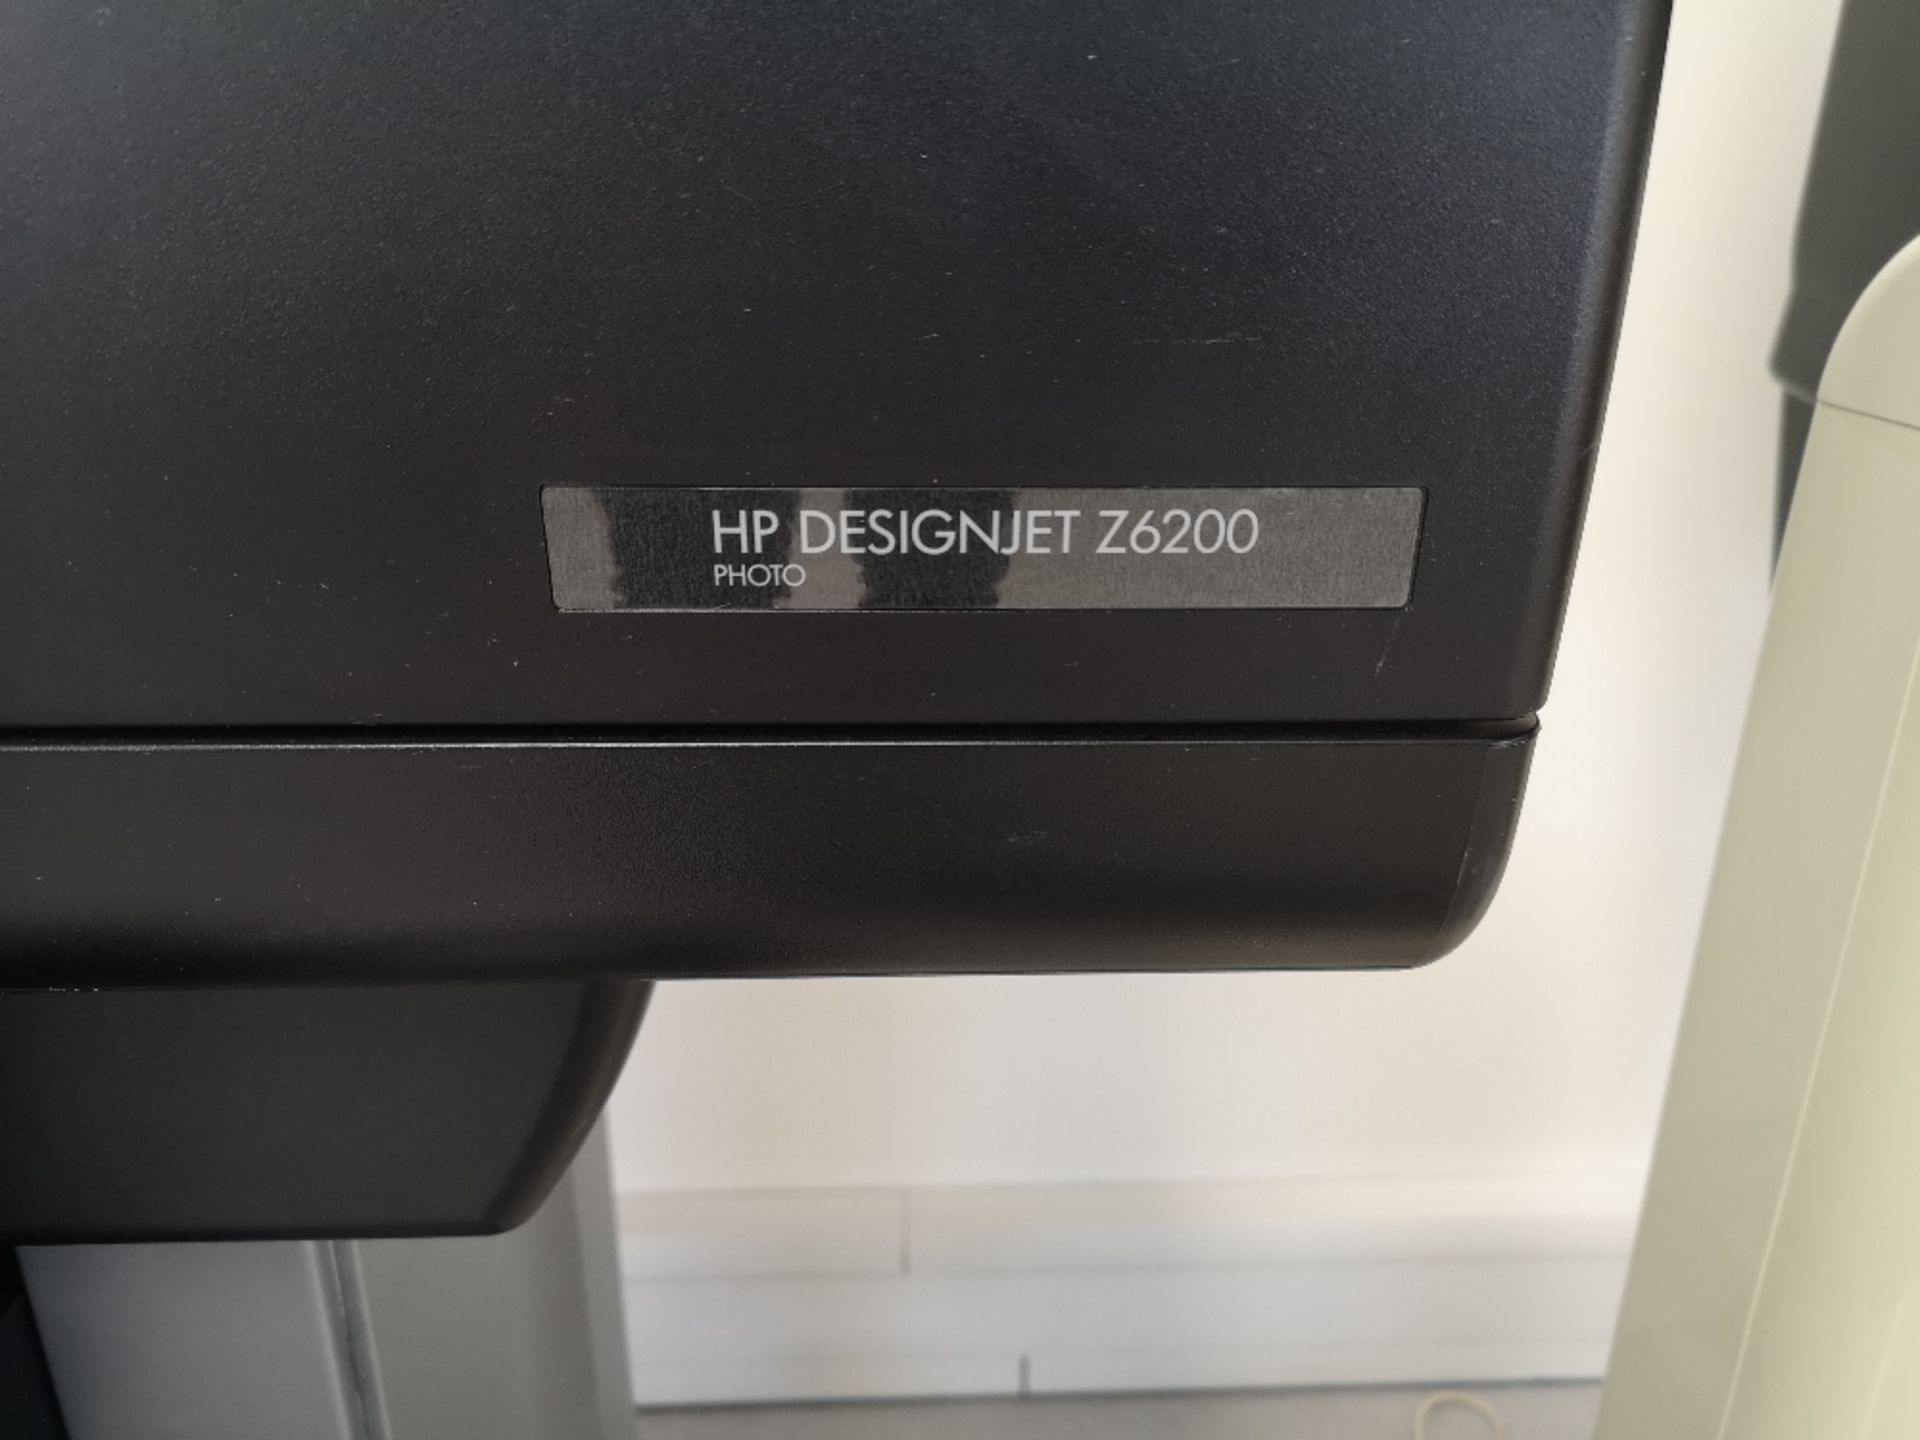 HP DesignJet Z6200 Photo 8-colour roll-to-roll printer - Image 3 of 6